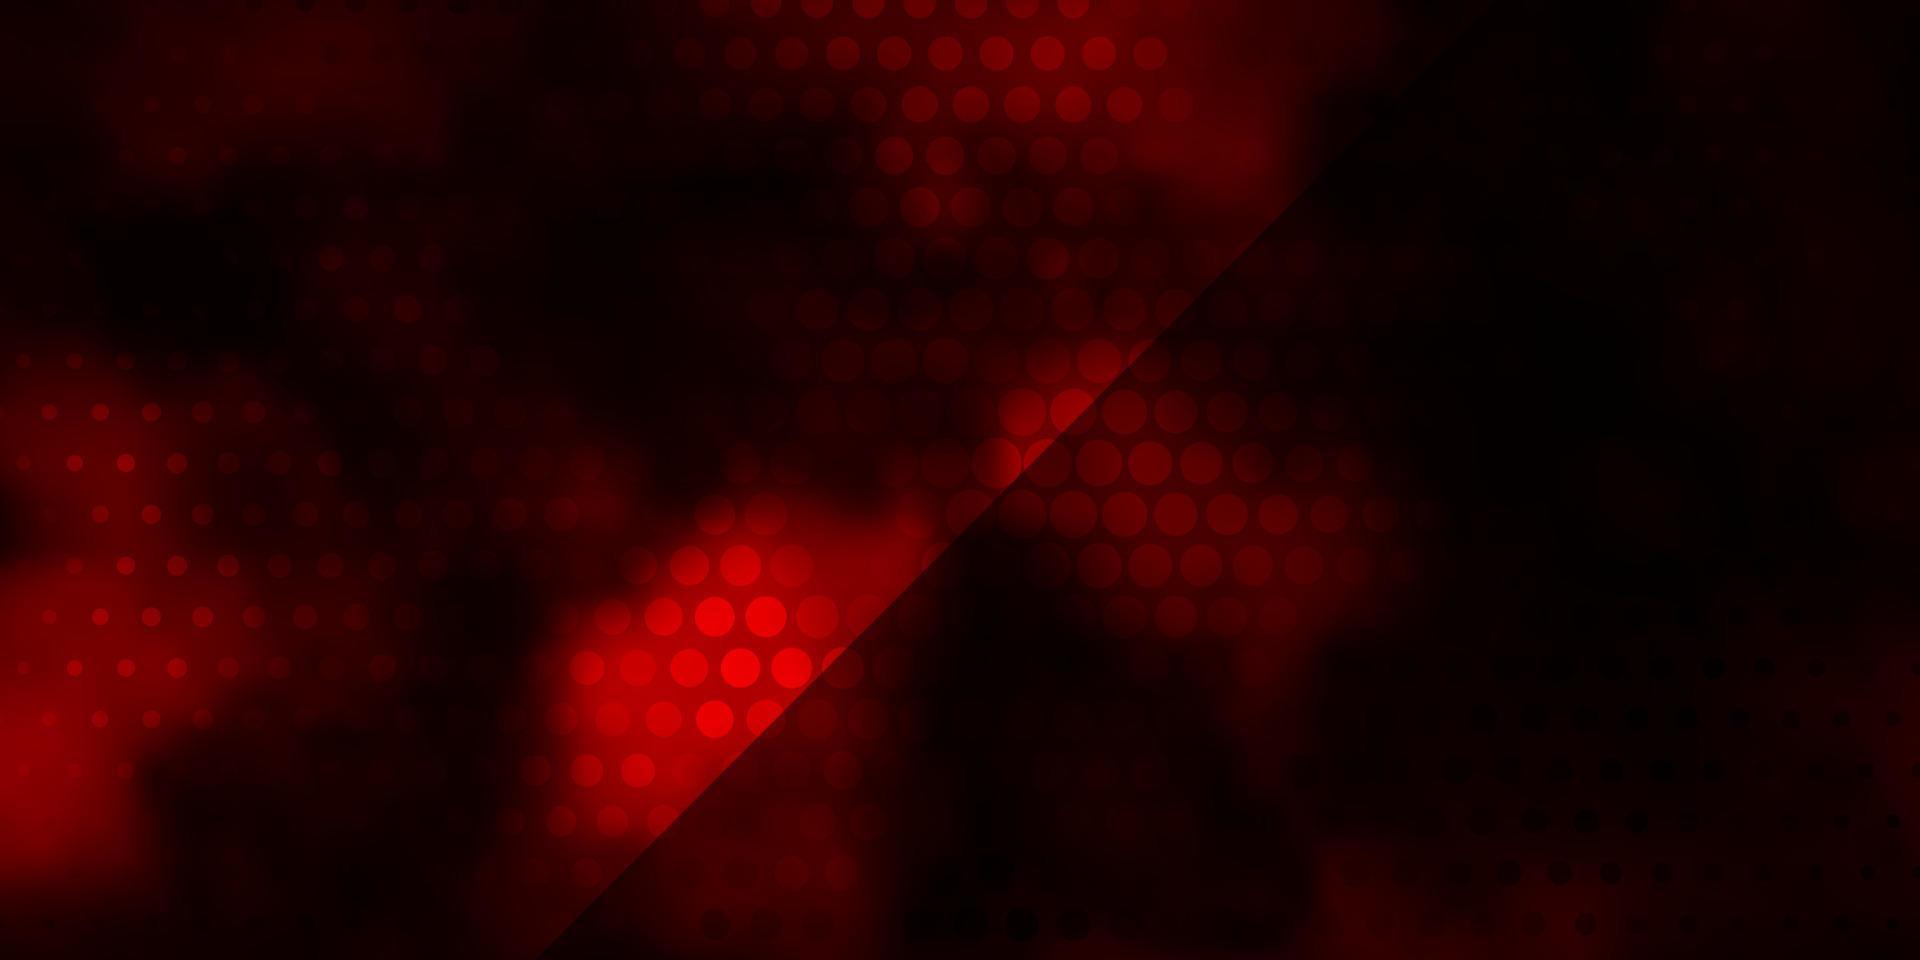 Dark Red vector background with circles